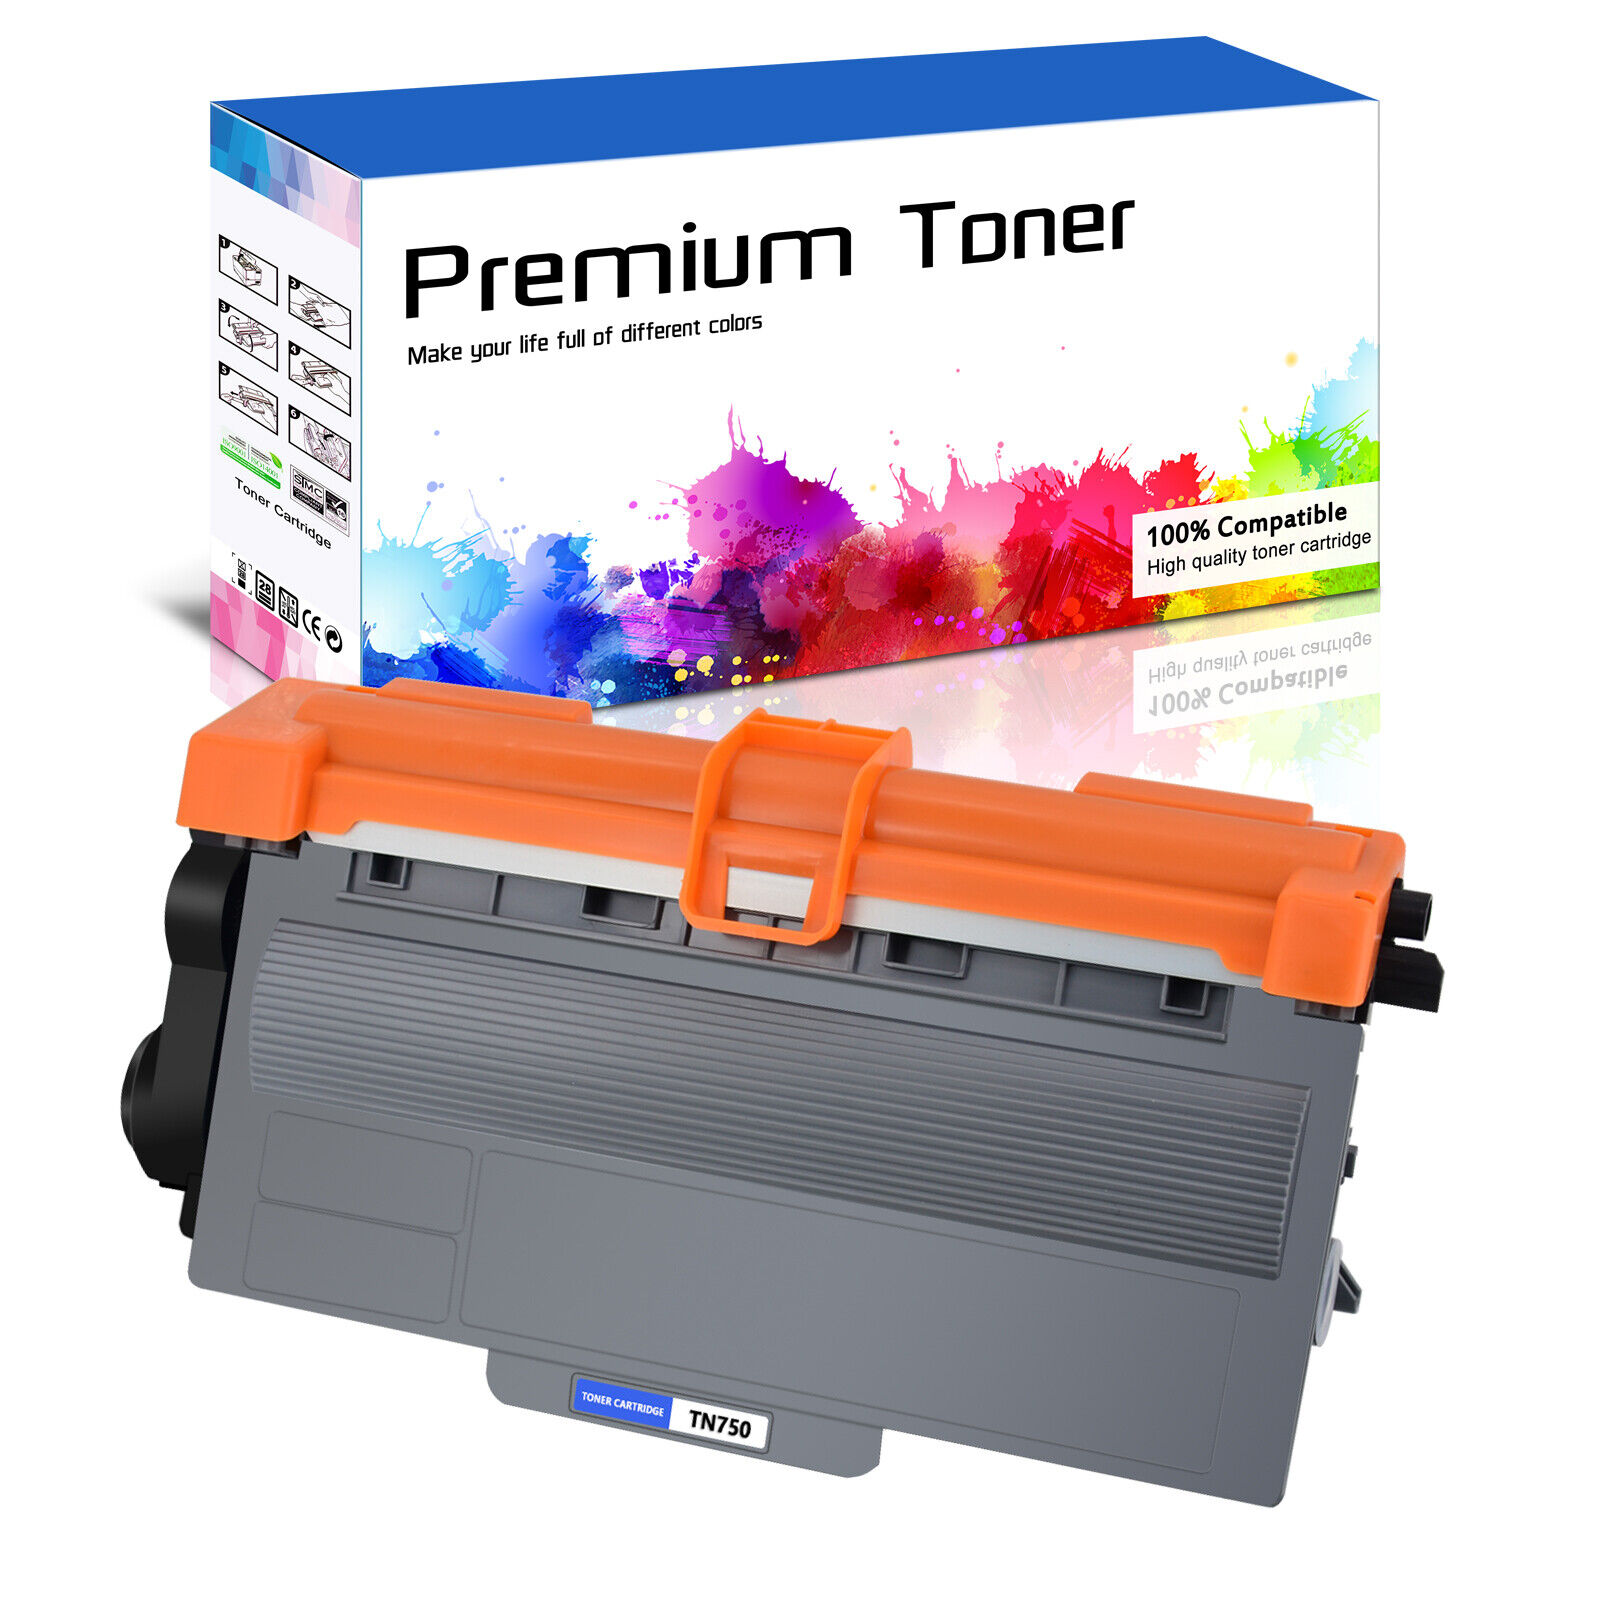 1-5PK High Yield Black TN750 Toner for Brother DCP-8150DN HL-5470DW MFC-8710DW